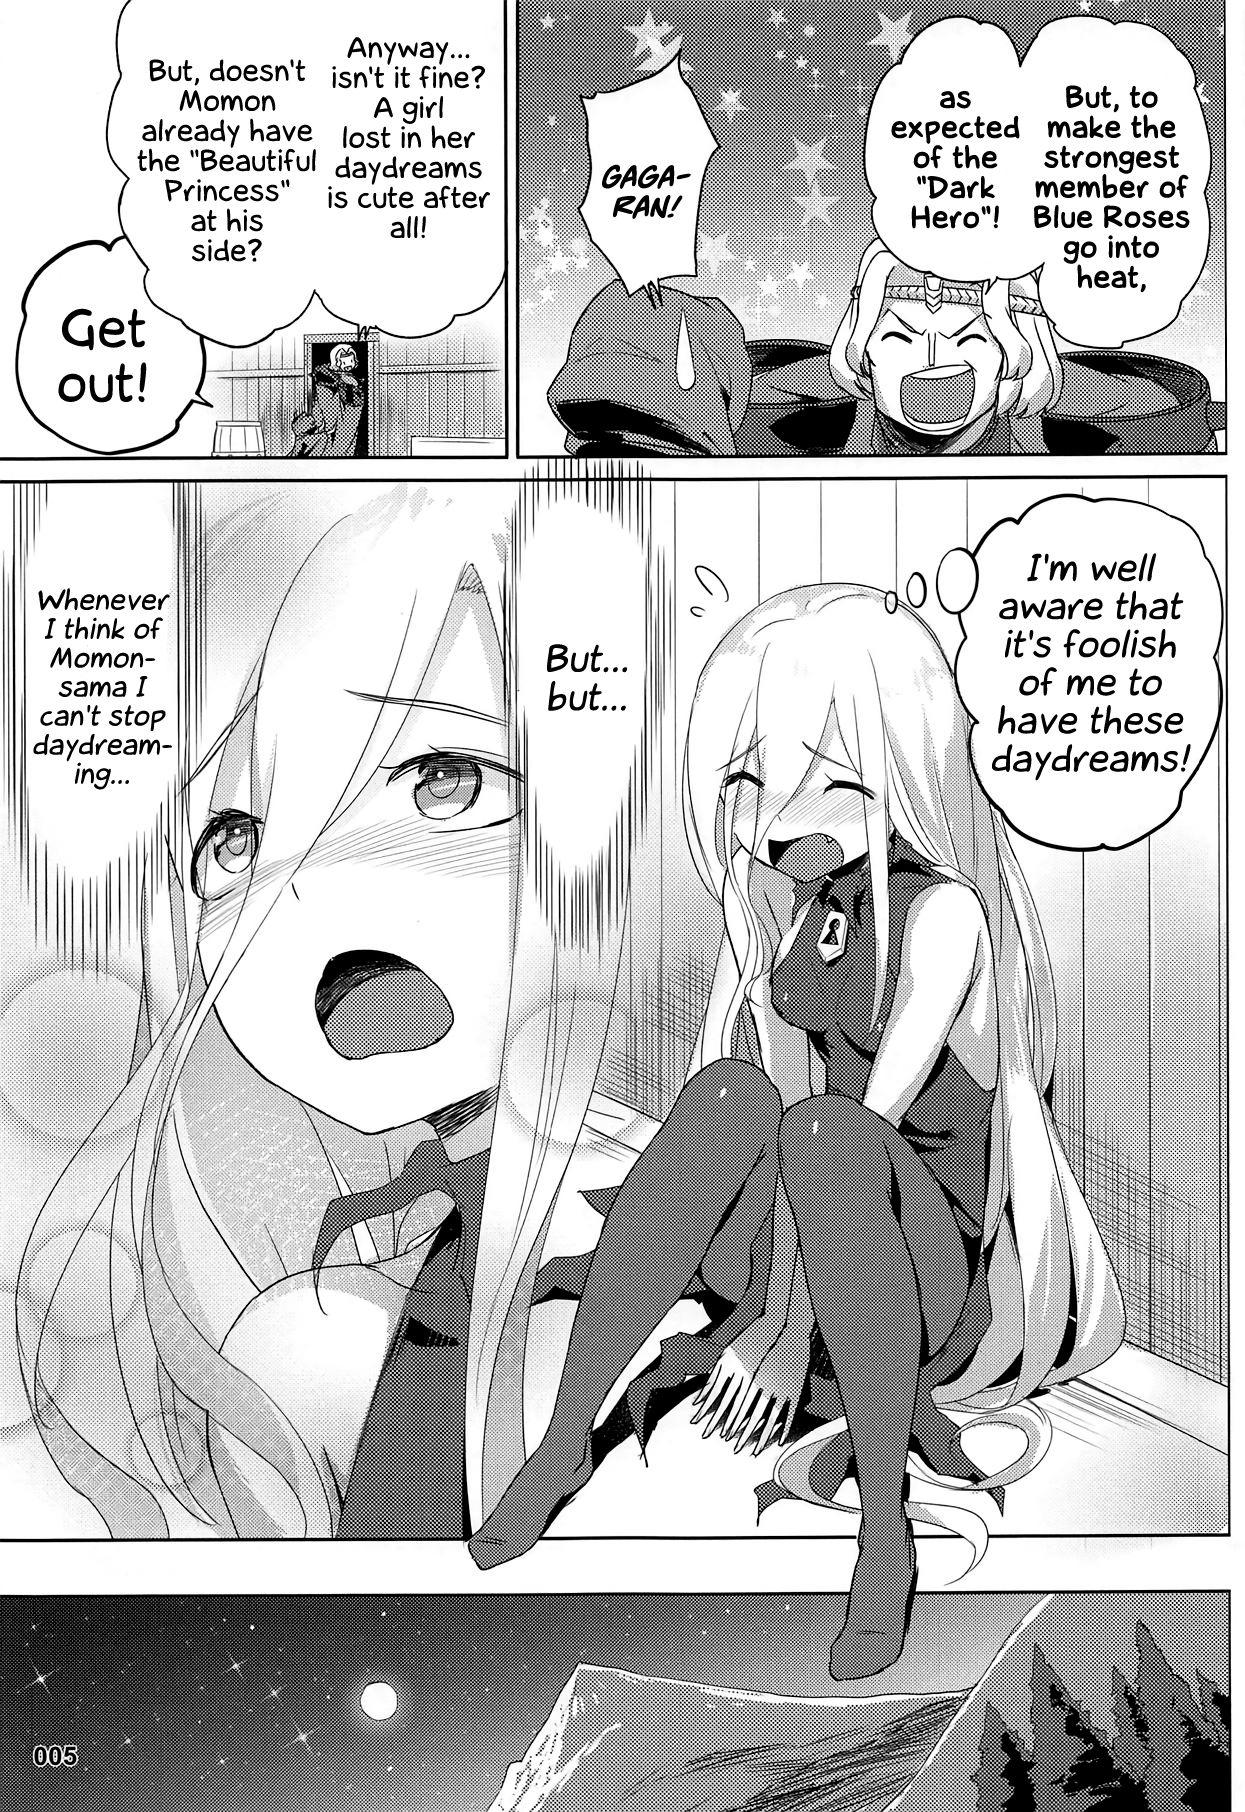 Socks Evileye no Mousou Sex | Evileye's Daydream Sex - Overlord Penetration - Page 6